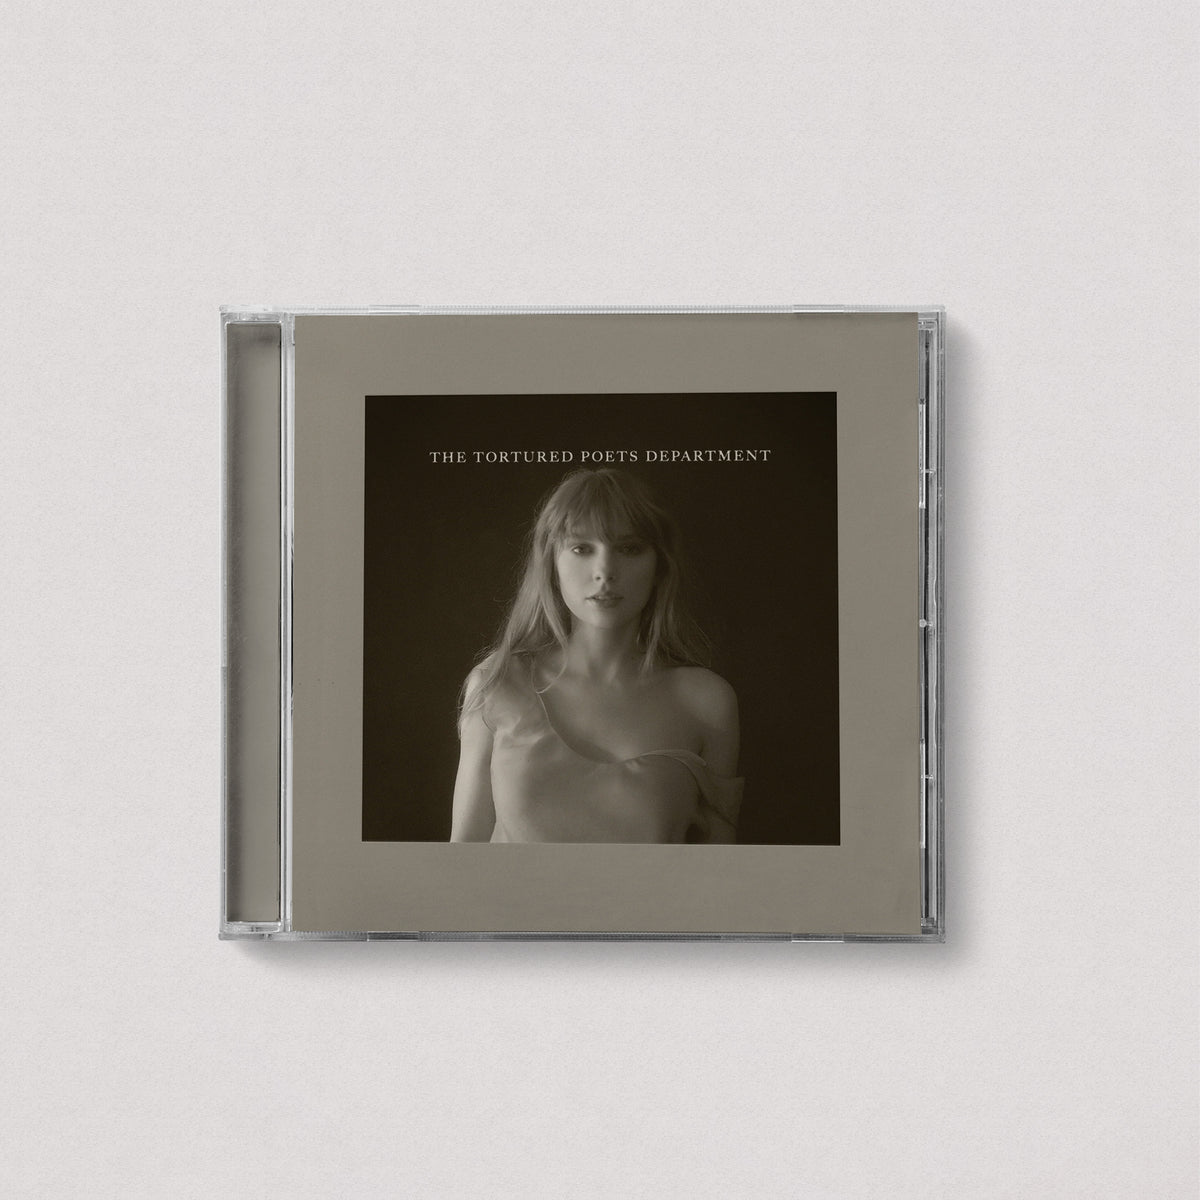 Taylor Swift - The Tortured Poets Department CD + Bonus Track "Down Bad (Acoustic Version)" (Exclusive, CD)